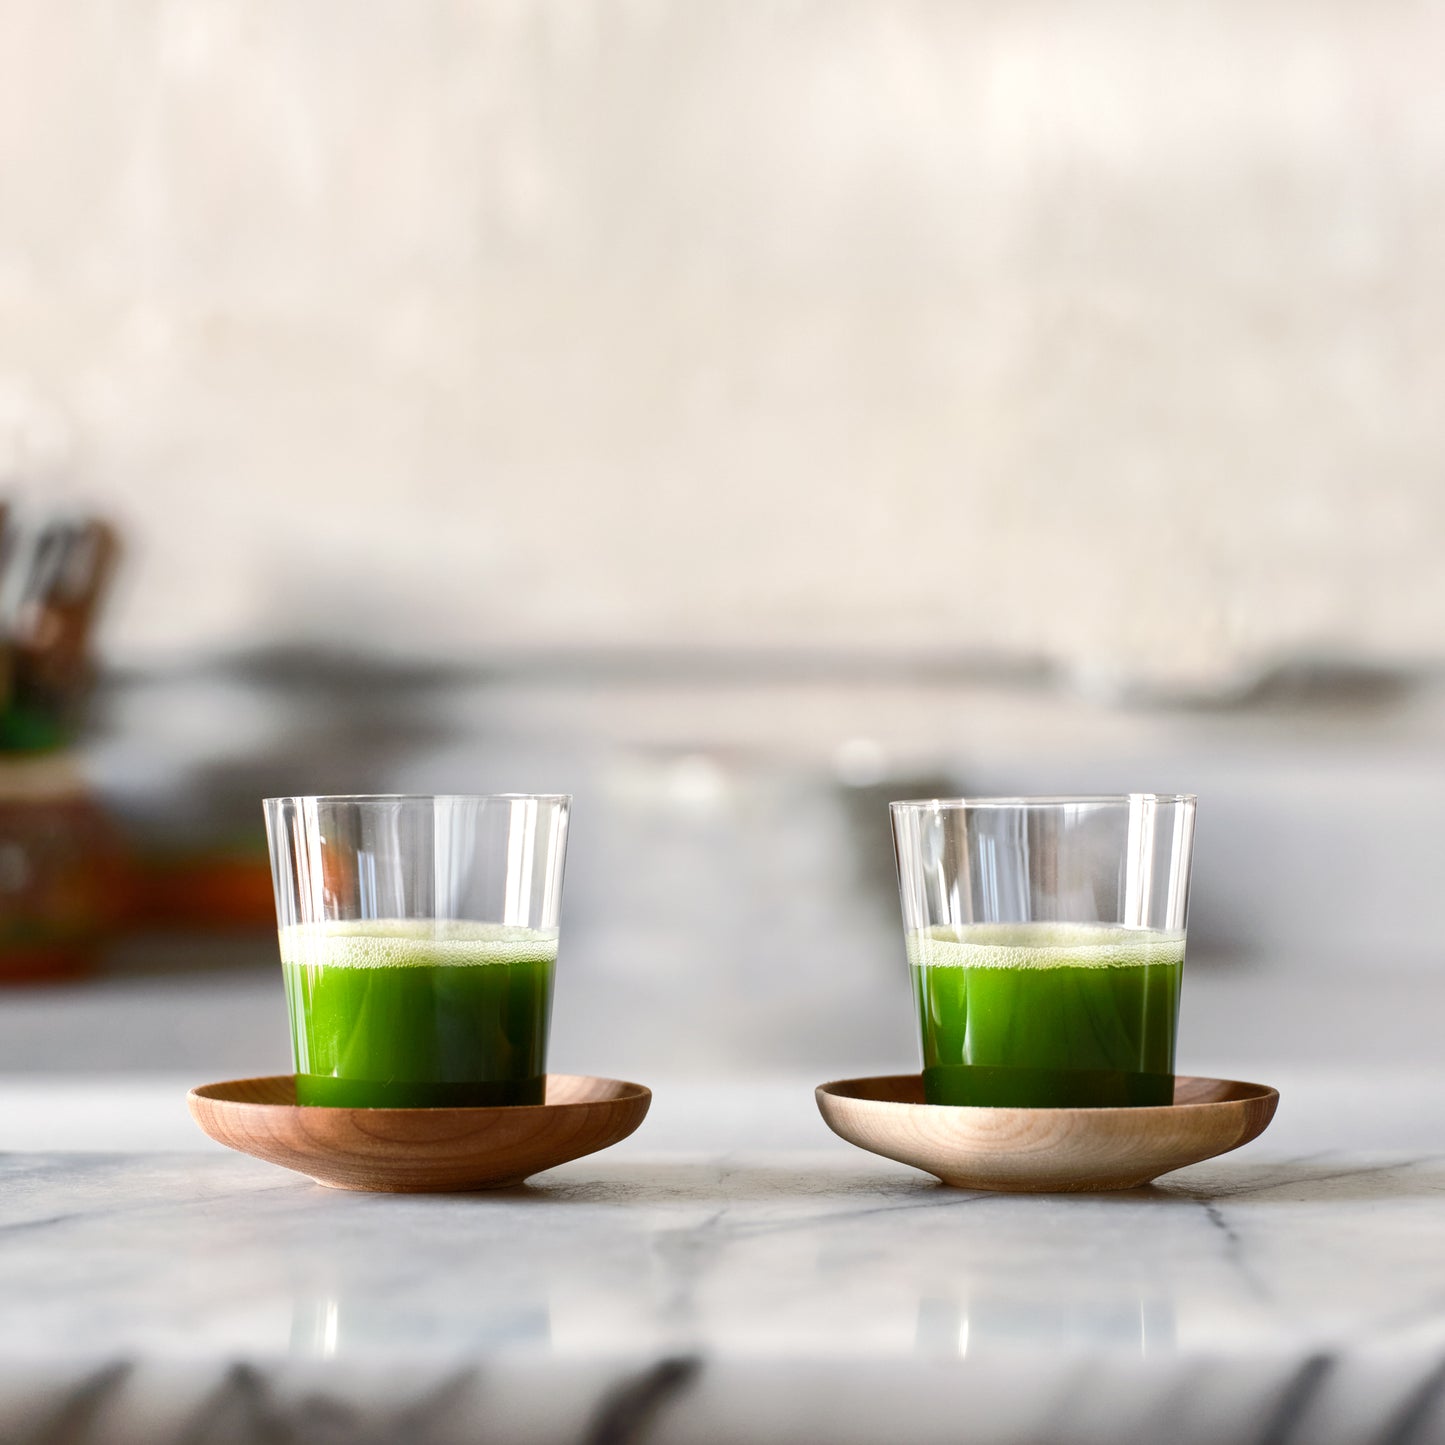 Two sets of Matcha Shot Glasses and Wooden Saucers sit next to each other, full of bright green matcha shots.